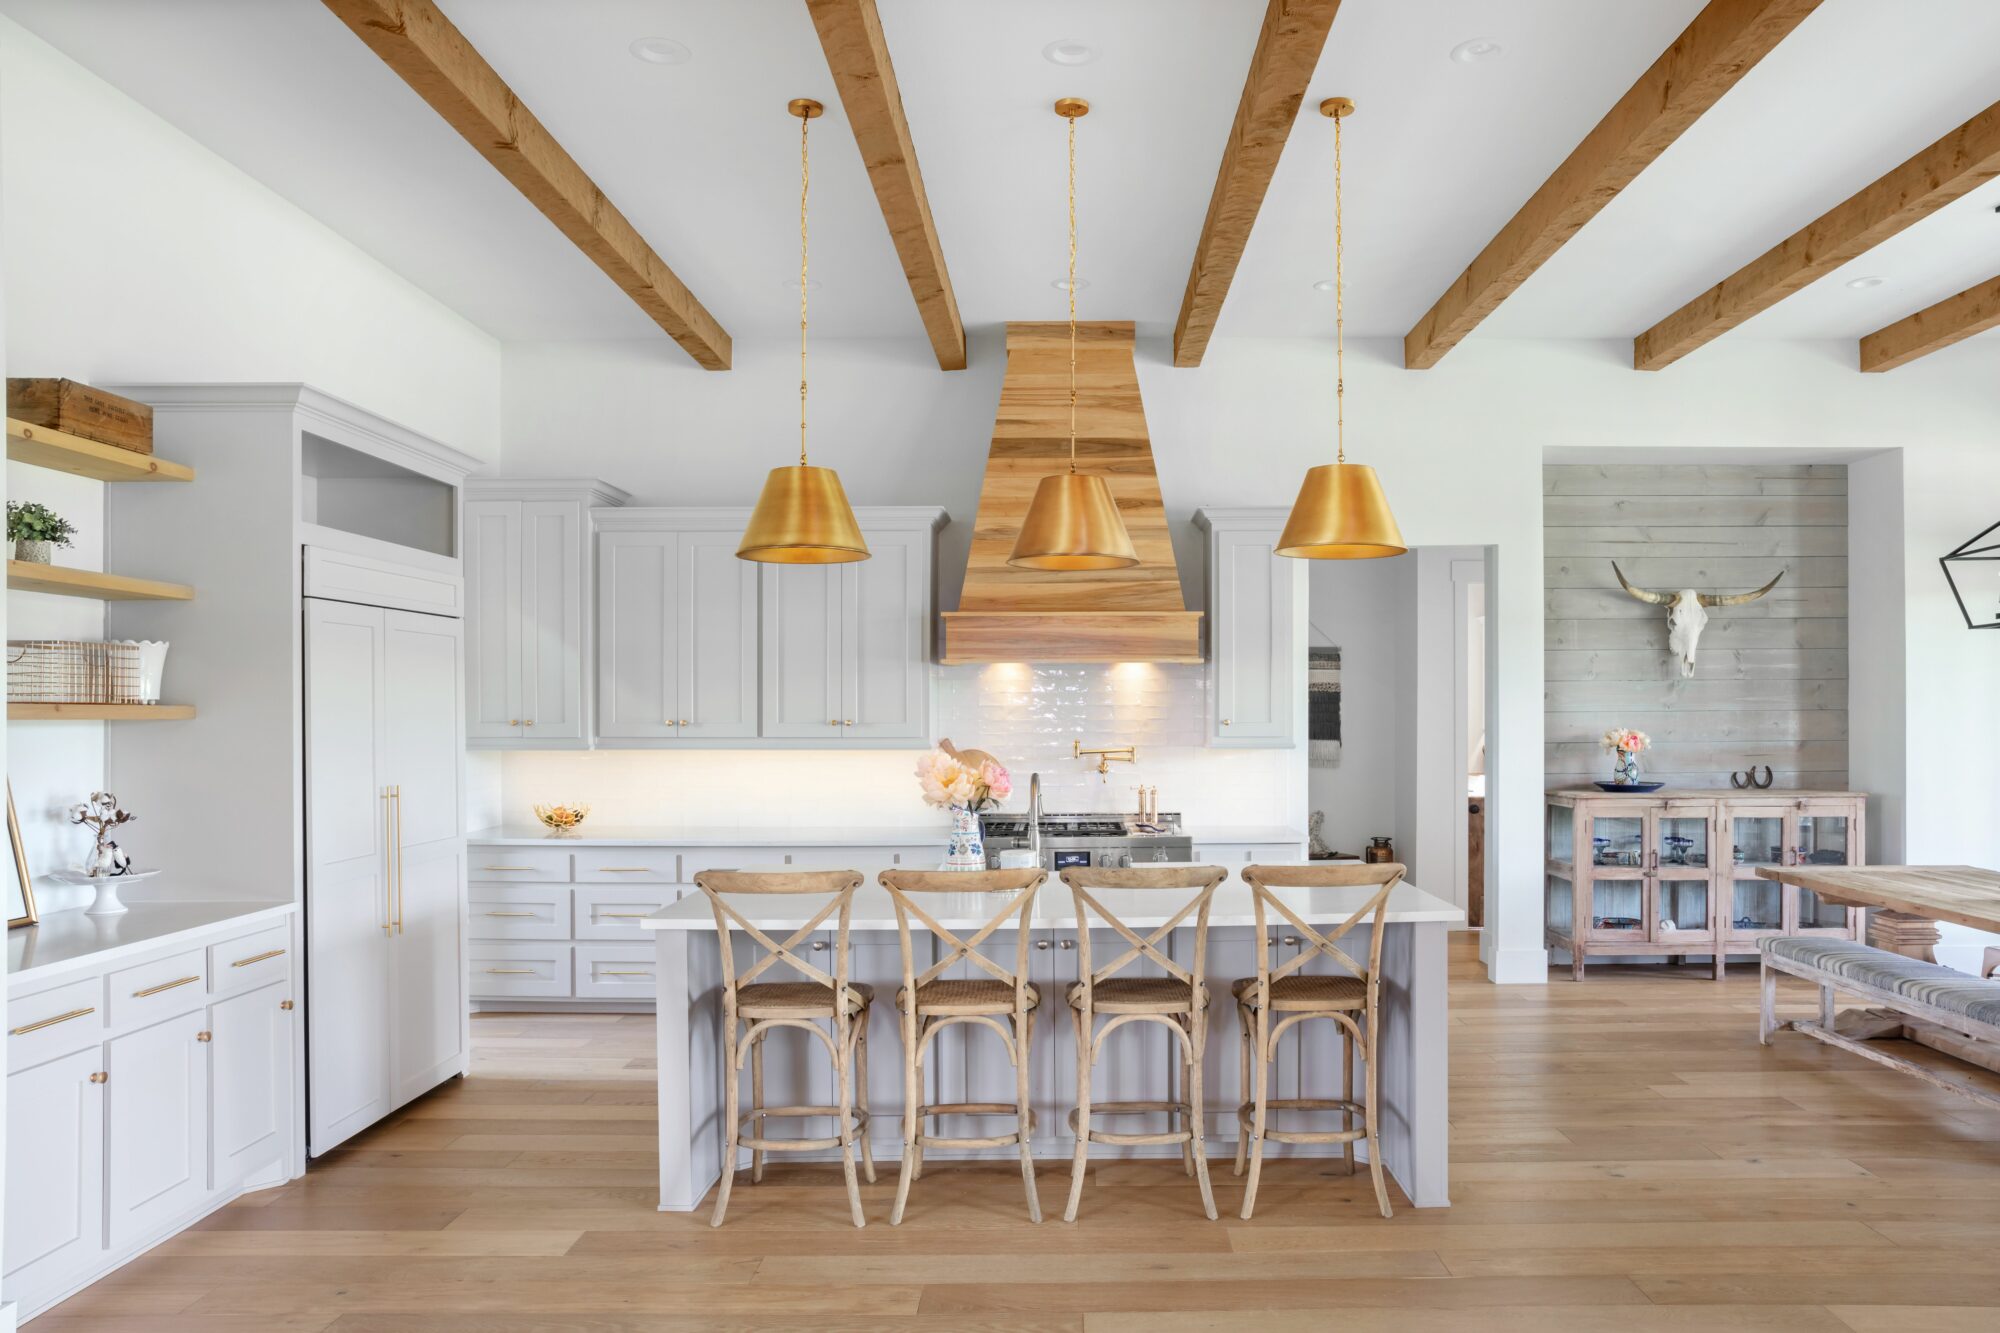 White, gold and wood highlight the kitchen